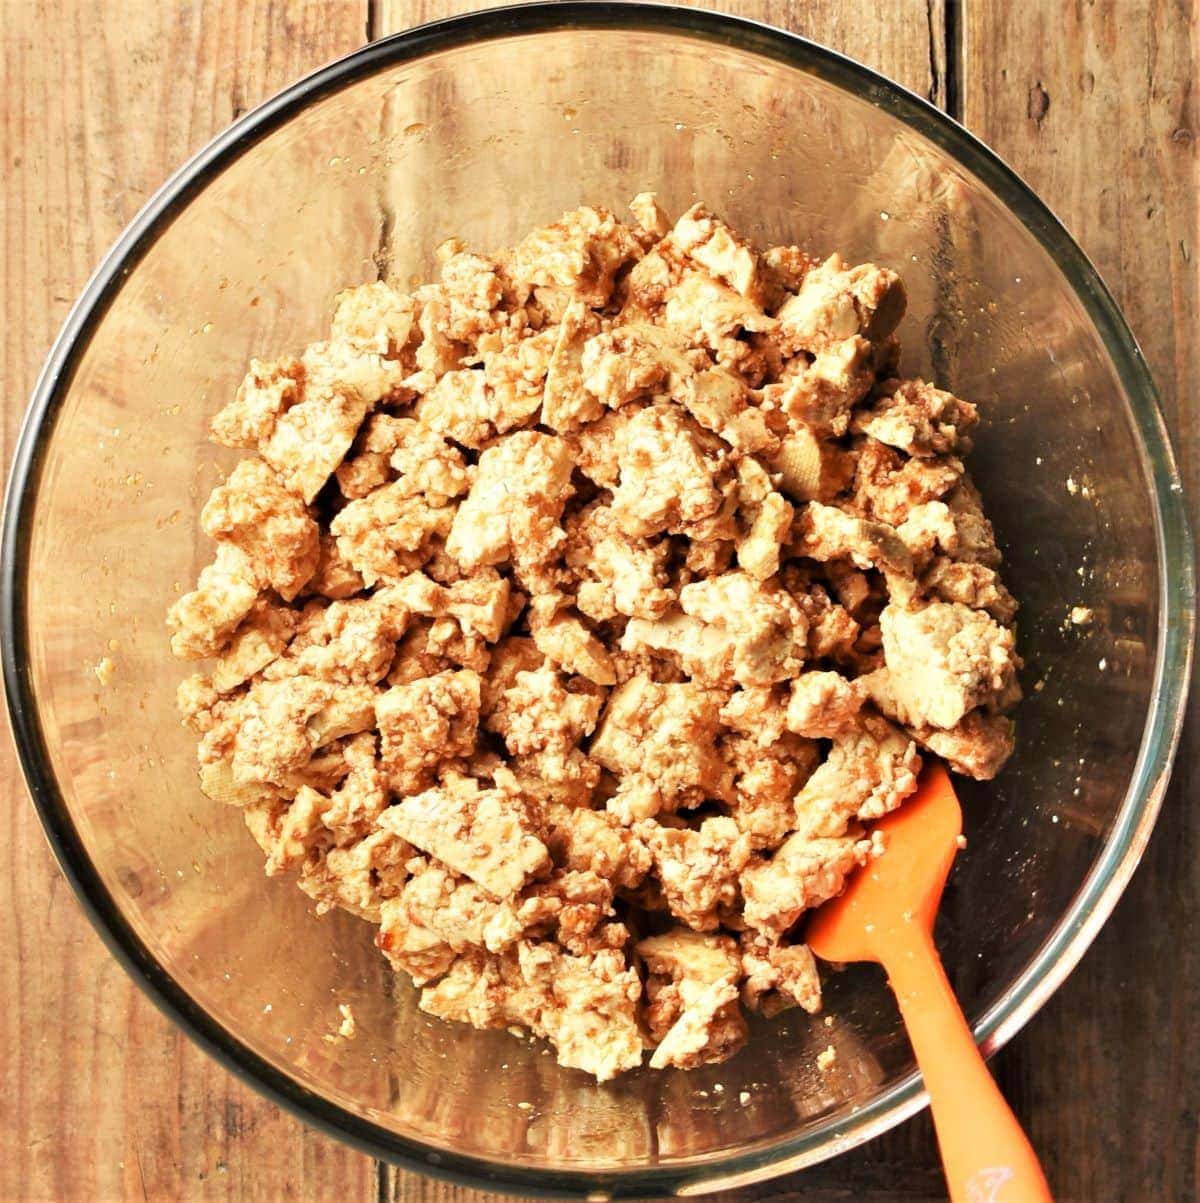 Crumbled tofu with marinade in mixing bowl with spatula.